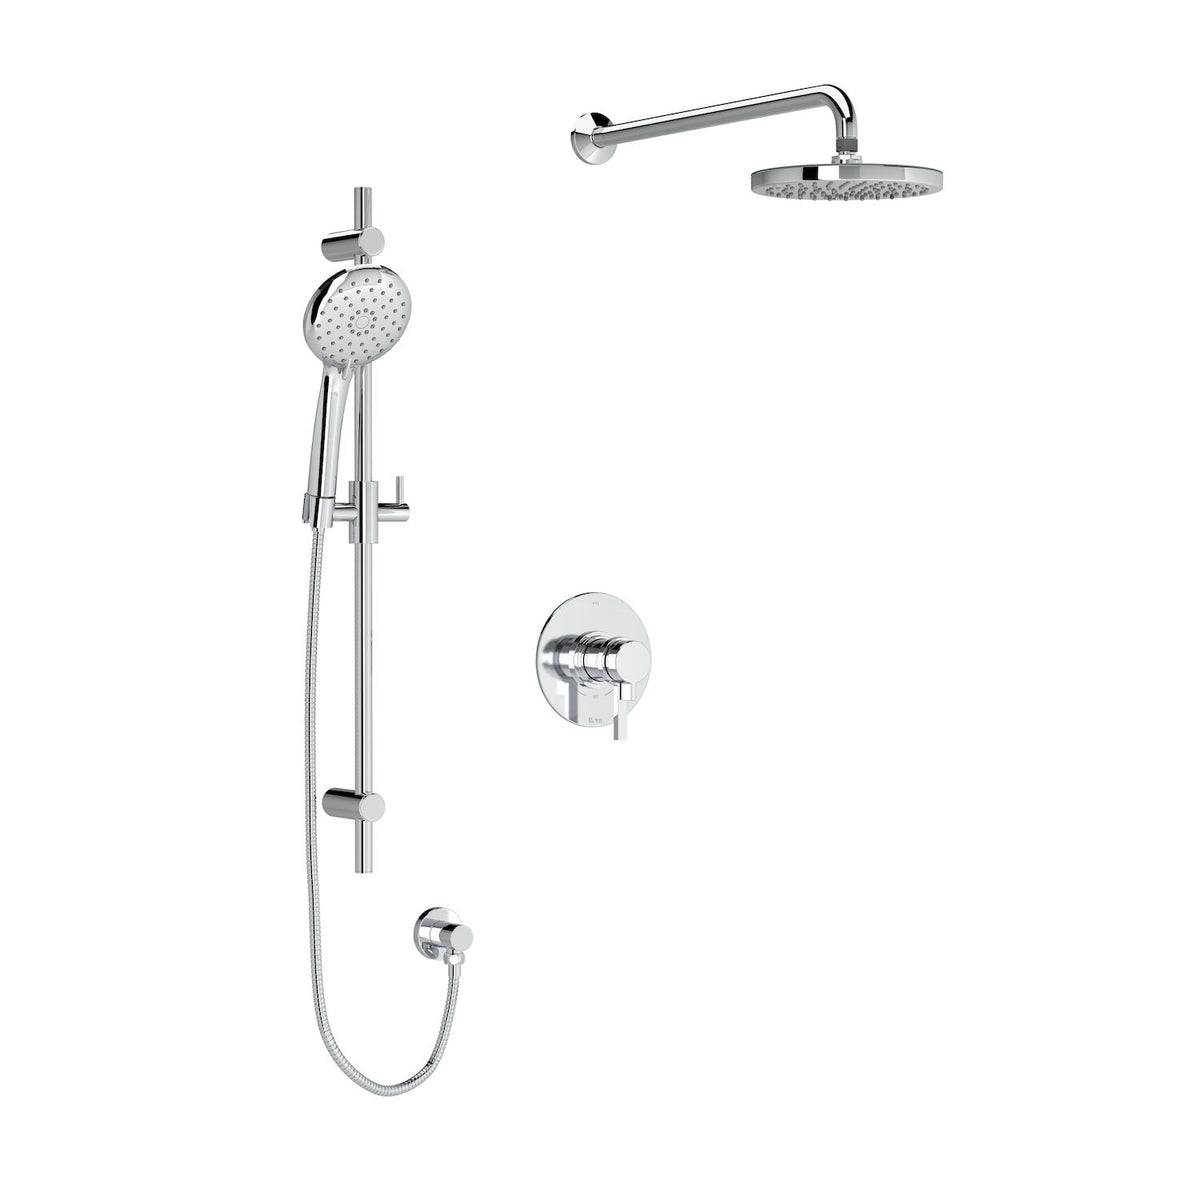 LOMBARDIA 1/2" THERMOSTATIC & PRESSURE BALANCE 3 FUNCTION SYSTEM TRIM WITH INTEGRATED VOLUME CONTROL